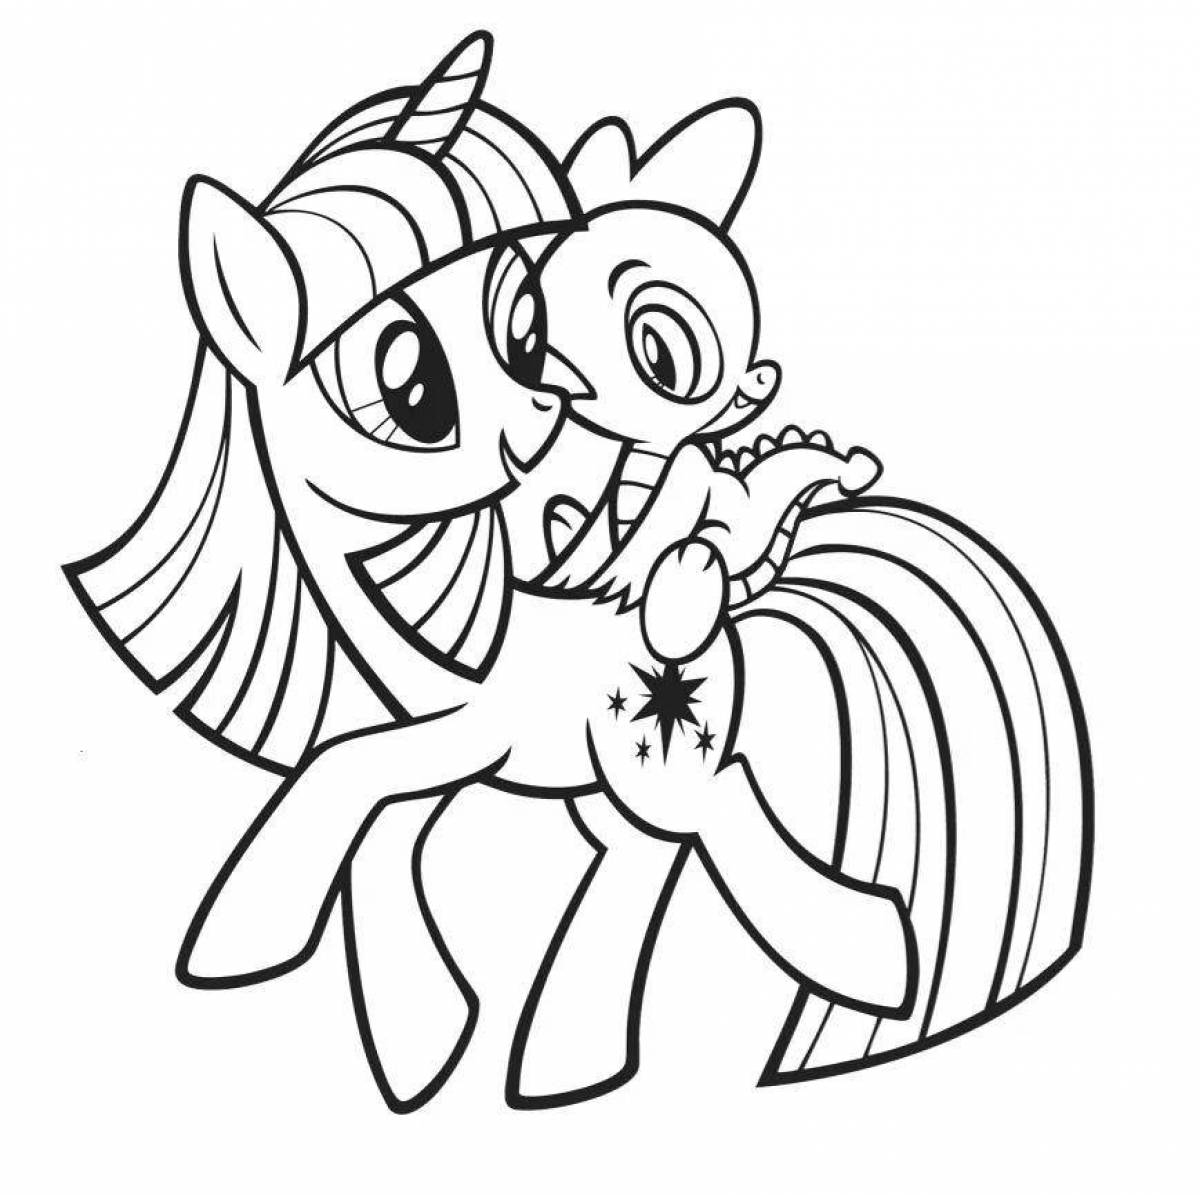 Serene twilight sparkle coloring page